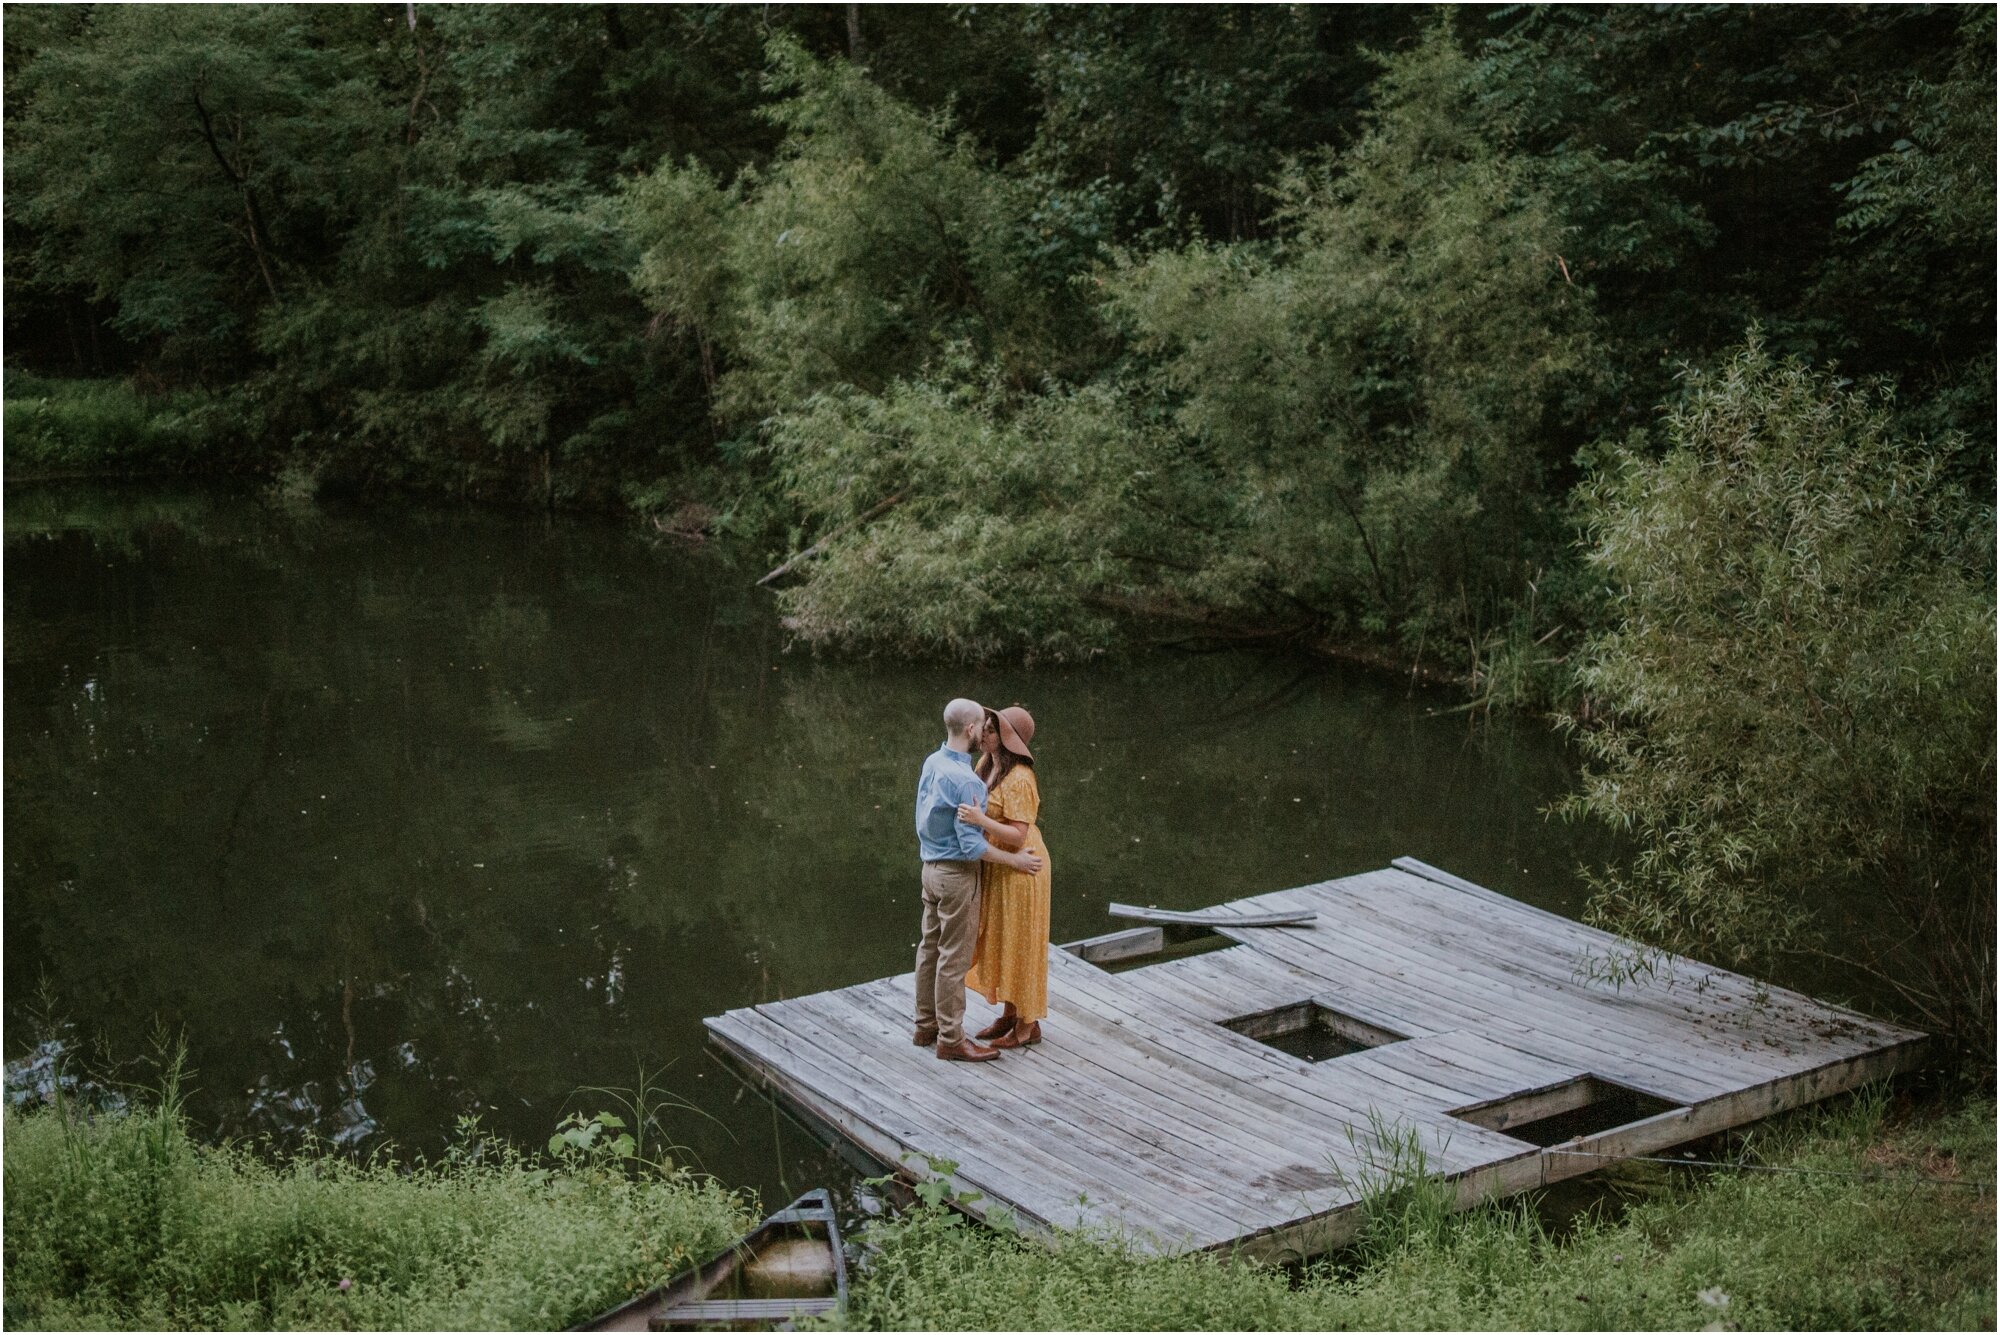 kingsport-tennessee-backyard-pond-bays-mountain-summer-engagement-session_0053.jpg